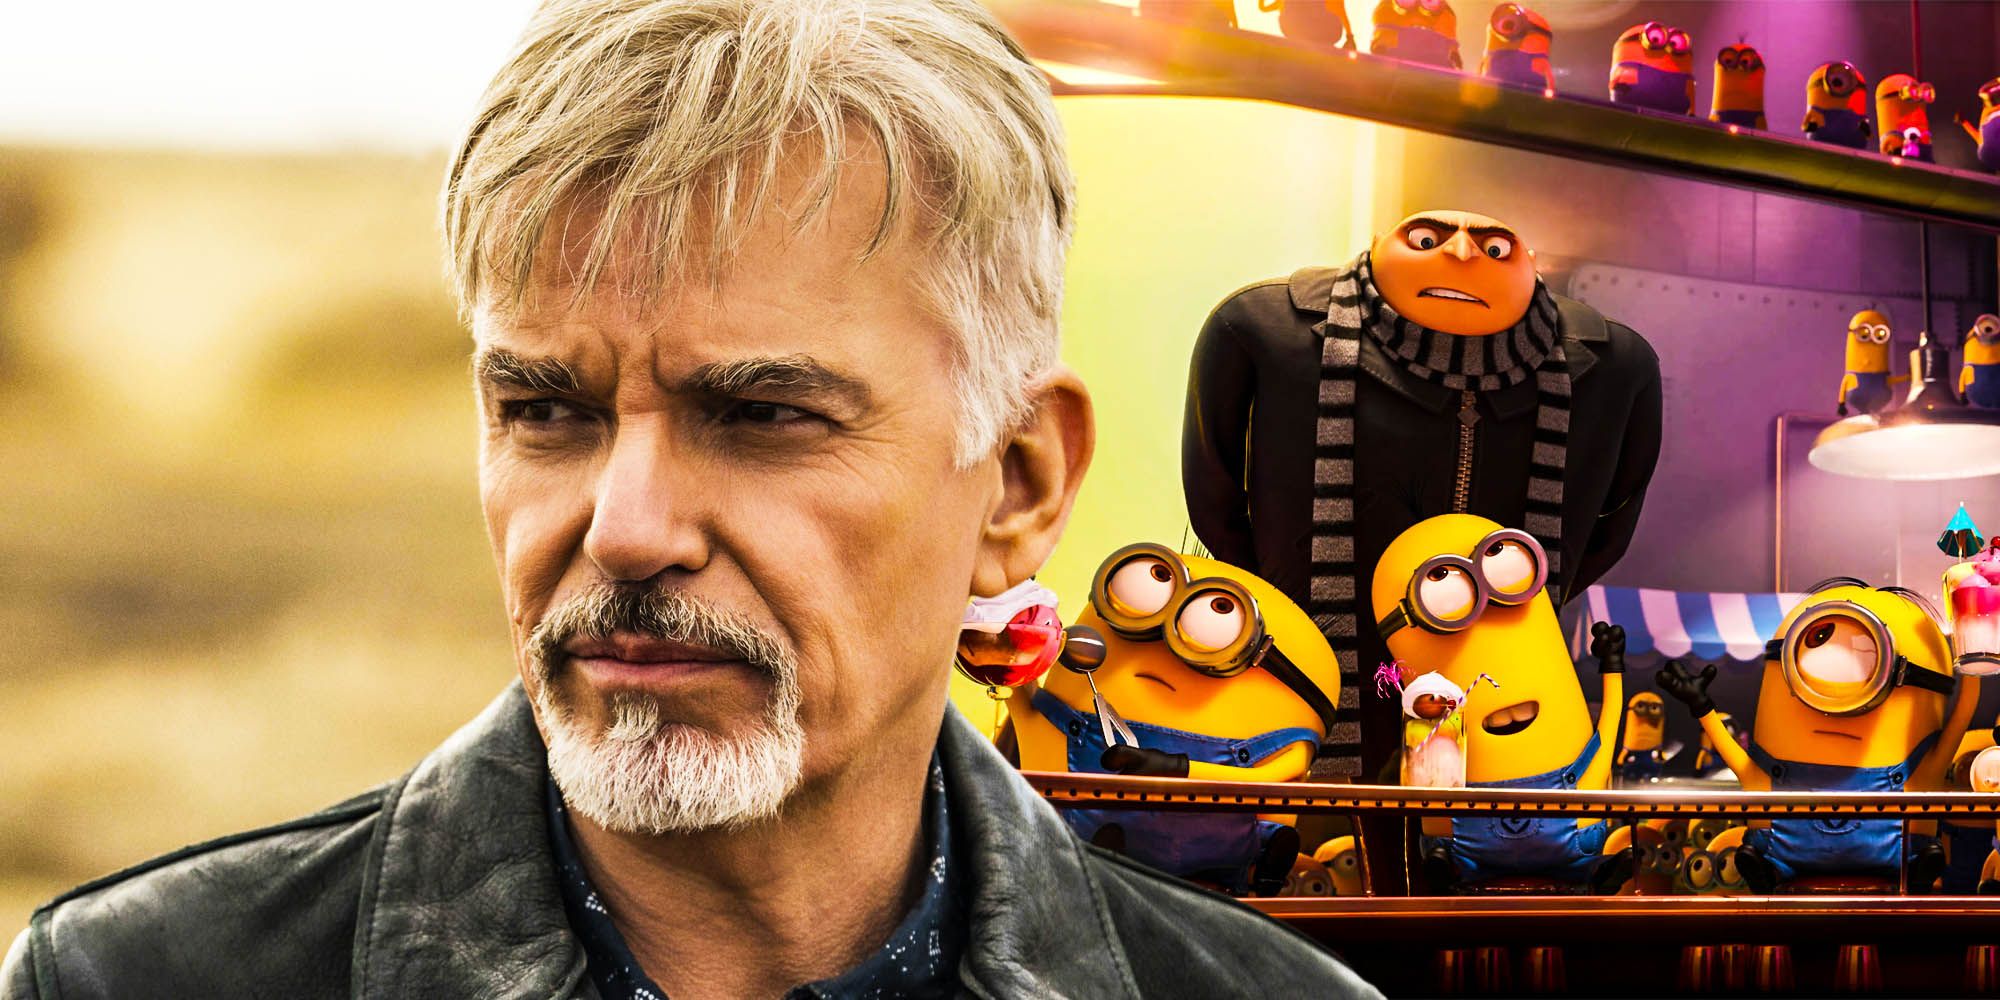 Amazon prime best tv shows and movies releasing this week Goliath season 4 despicable me 2